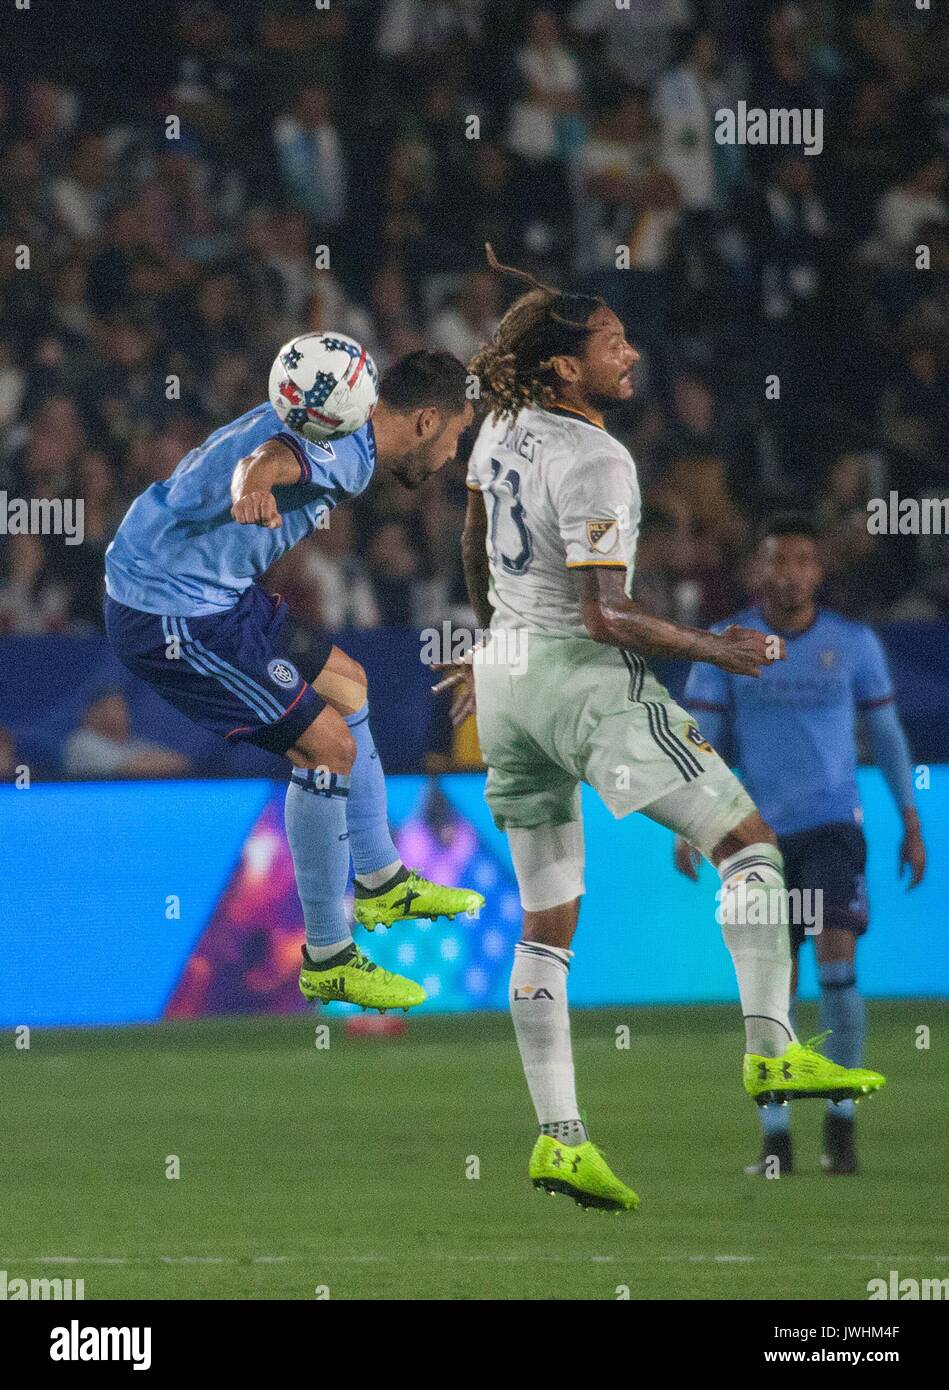 Carson, USA. 12th Aug, 2017. Jermaine Jones (R) of the Los Angeles Galaxy vies with David Villa of New York FC during the 2017 Major League Soccer (MLS) match between Los Angeles Galaxy and New York FC in Carson, California, the U.S., Aug. 12, 2017. Credit: Javier Rojas/Xinhua/Alamy Live News Stock Photo